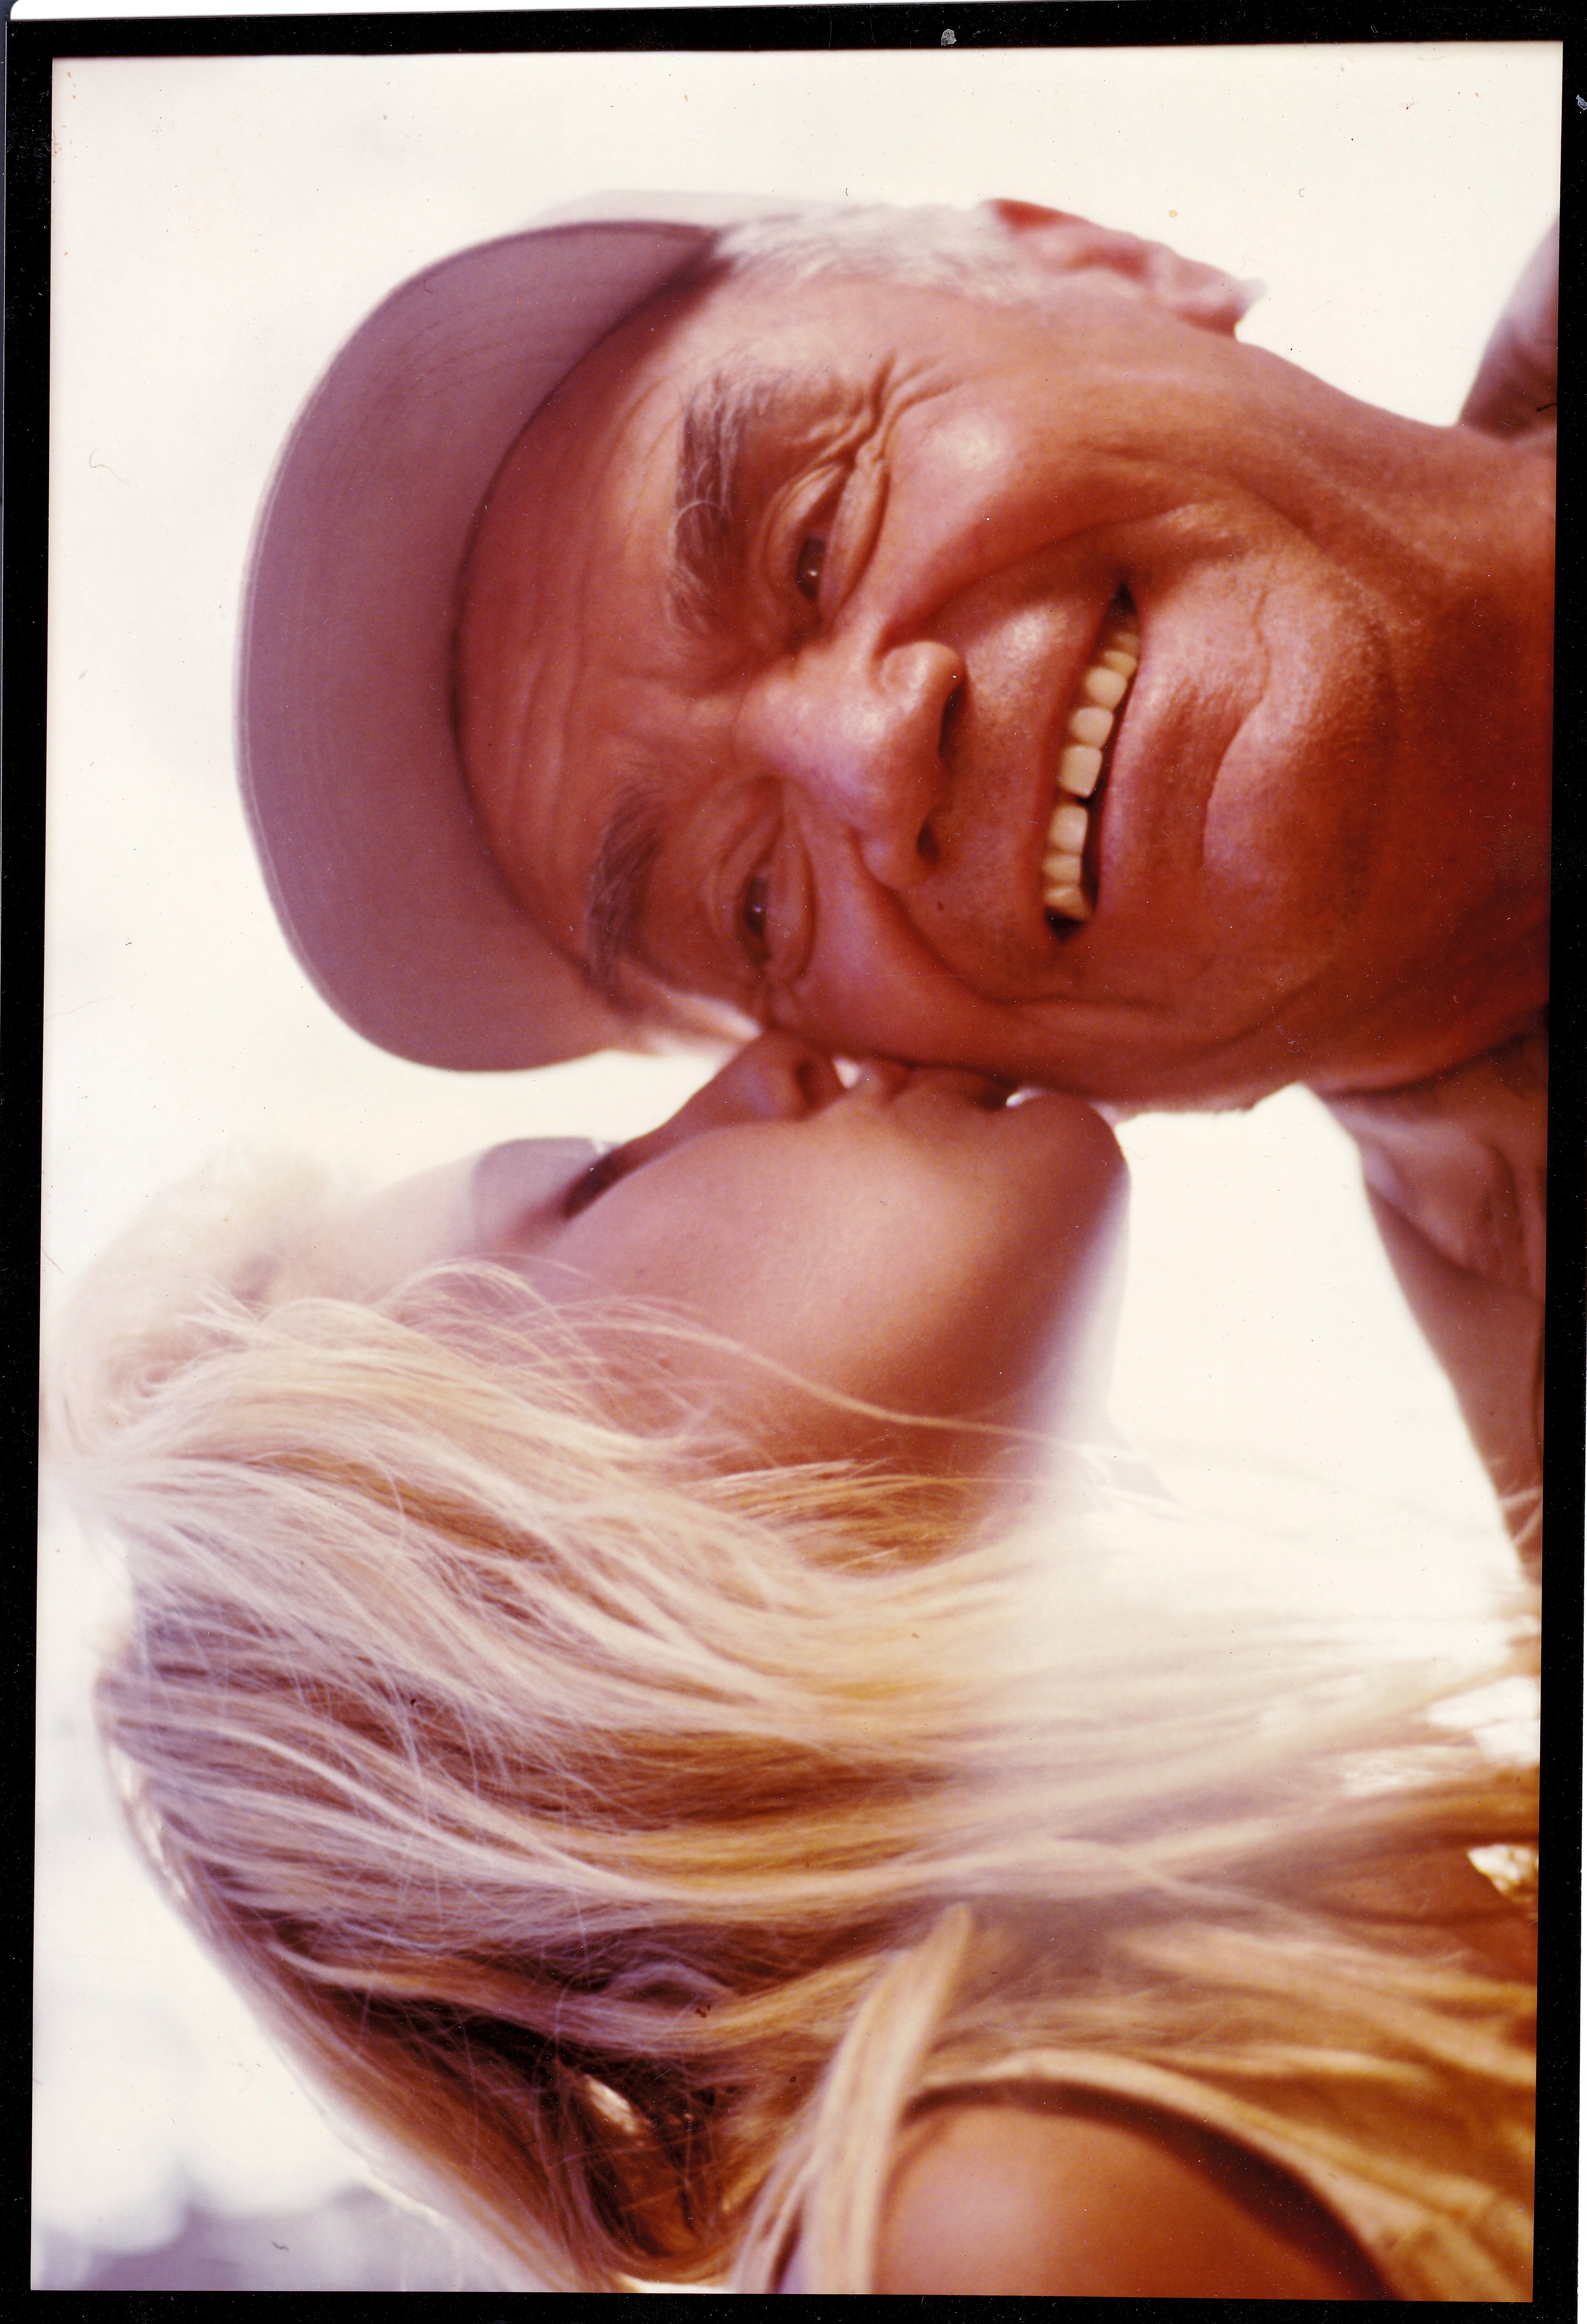 Nancy Mulford with Ernest Borgnine on the set of 